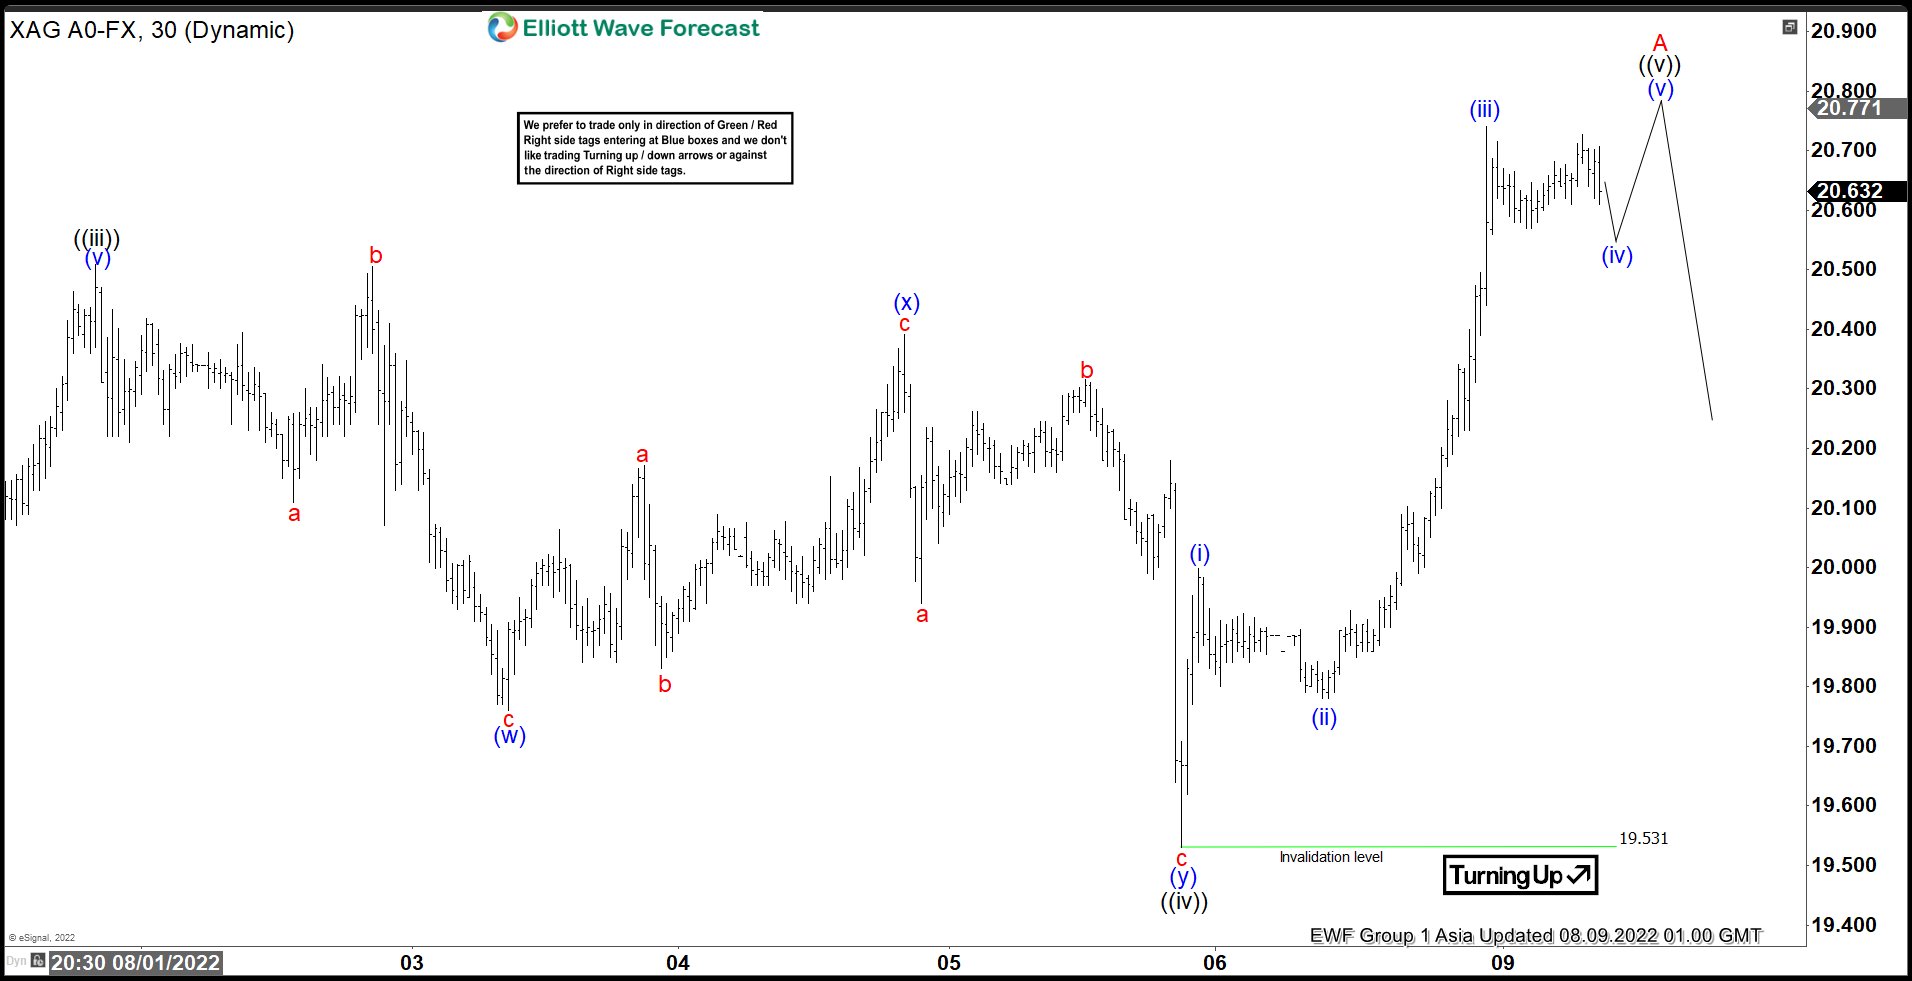 Elliott Wave View: Silver (XAGUSD) Impulsive Rally Suggests Further Upside